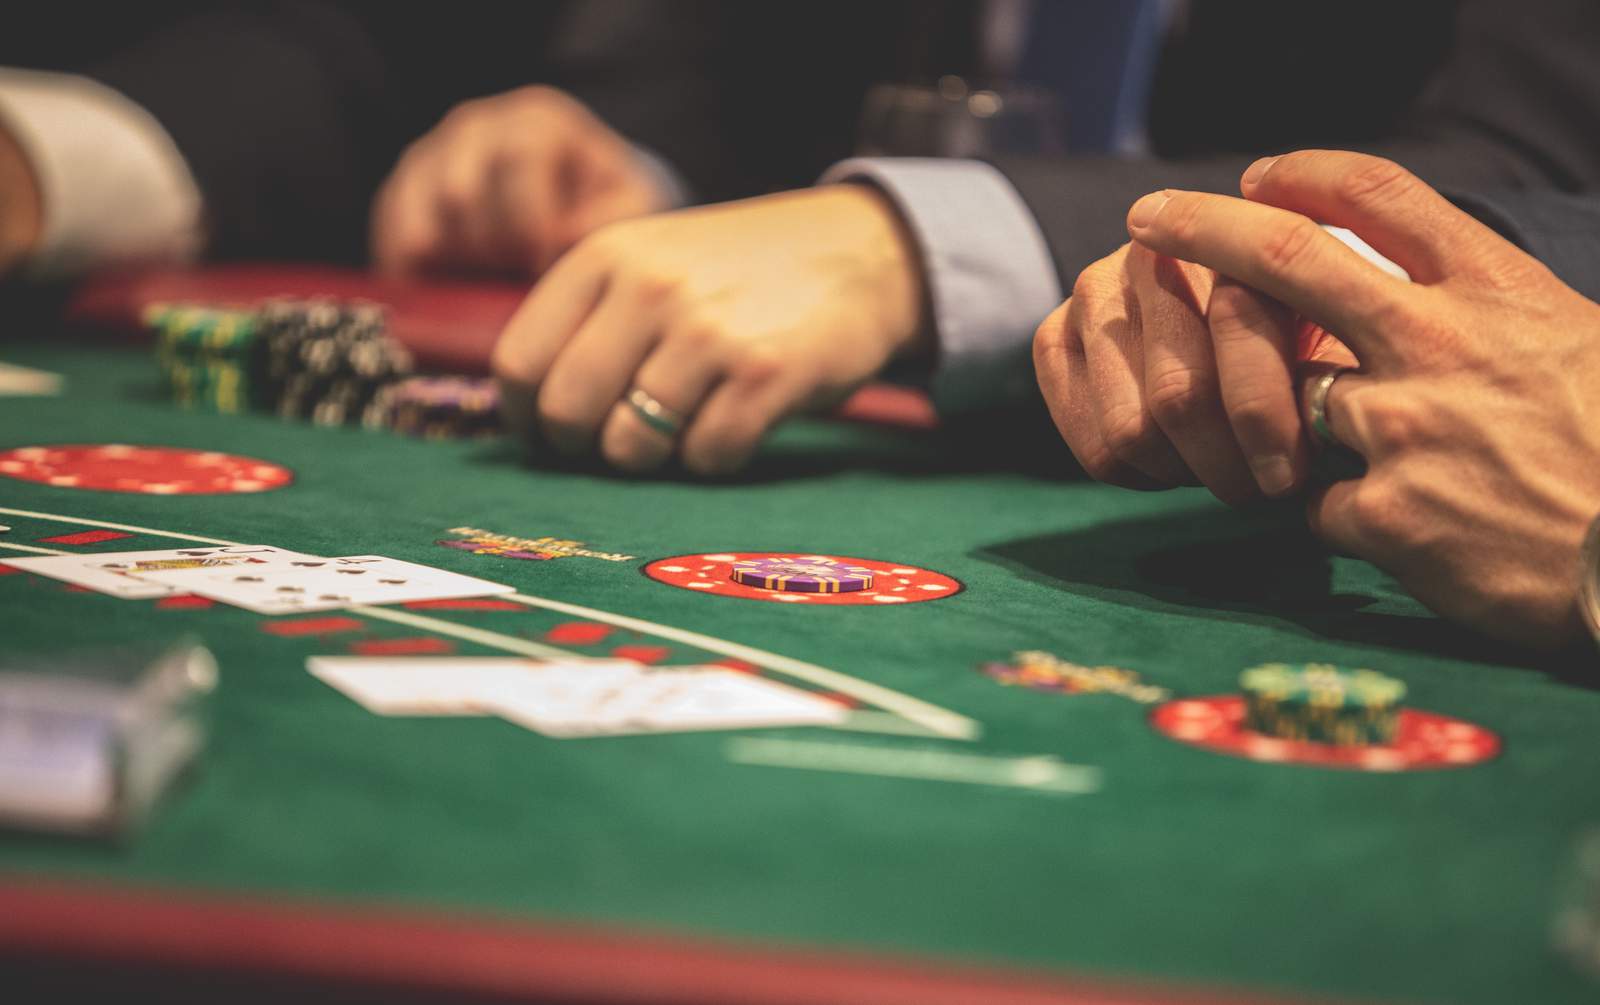 There’s an entire month dedicated to gambling awareness -- here’s what it’s all about